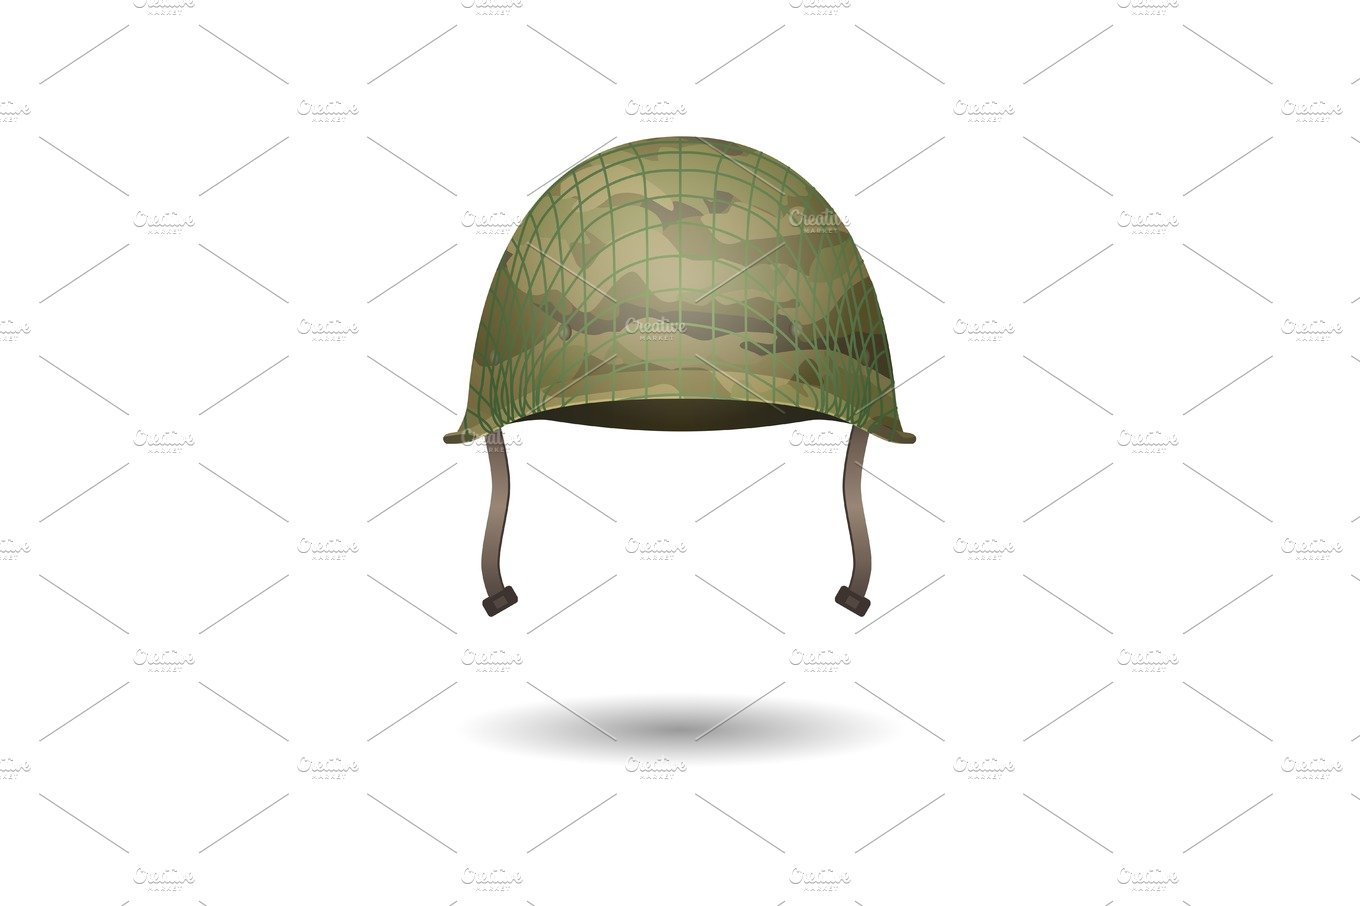 Design of military modern helmet with camouflage patterns. cover image.